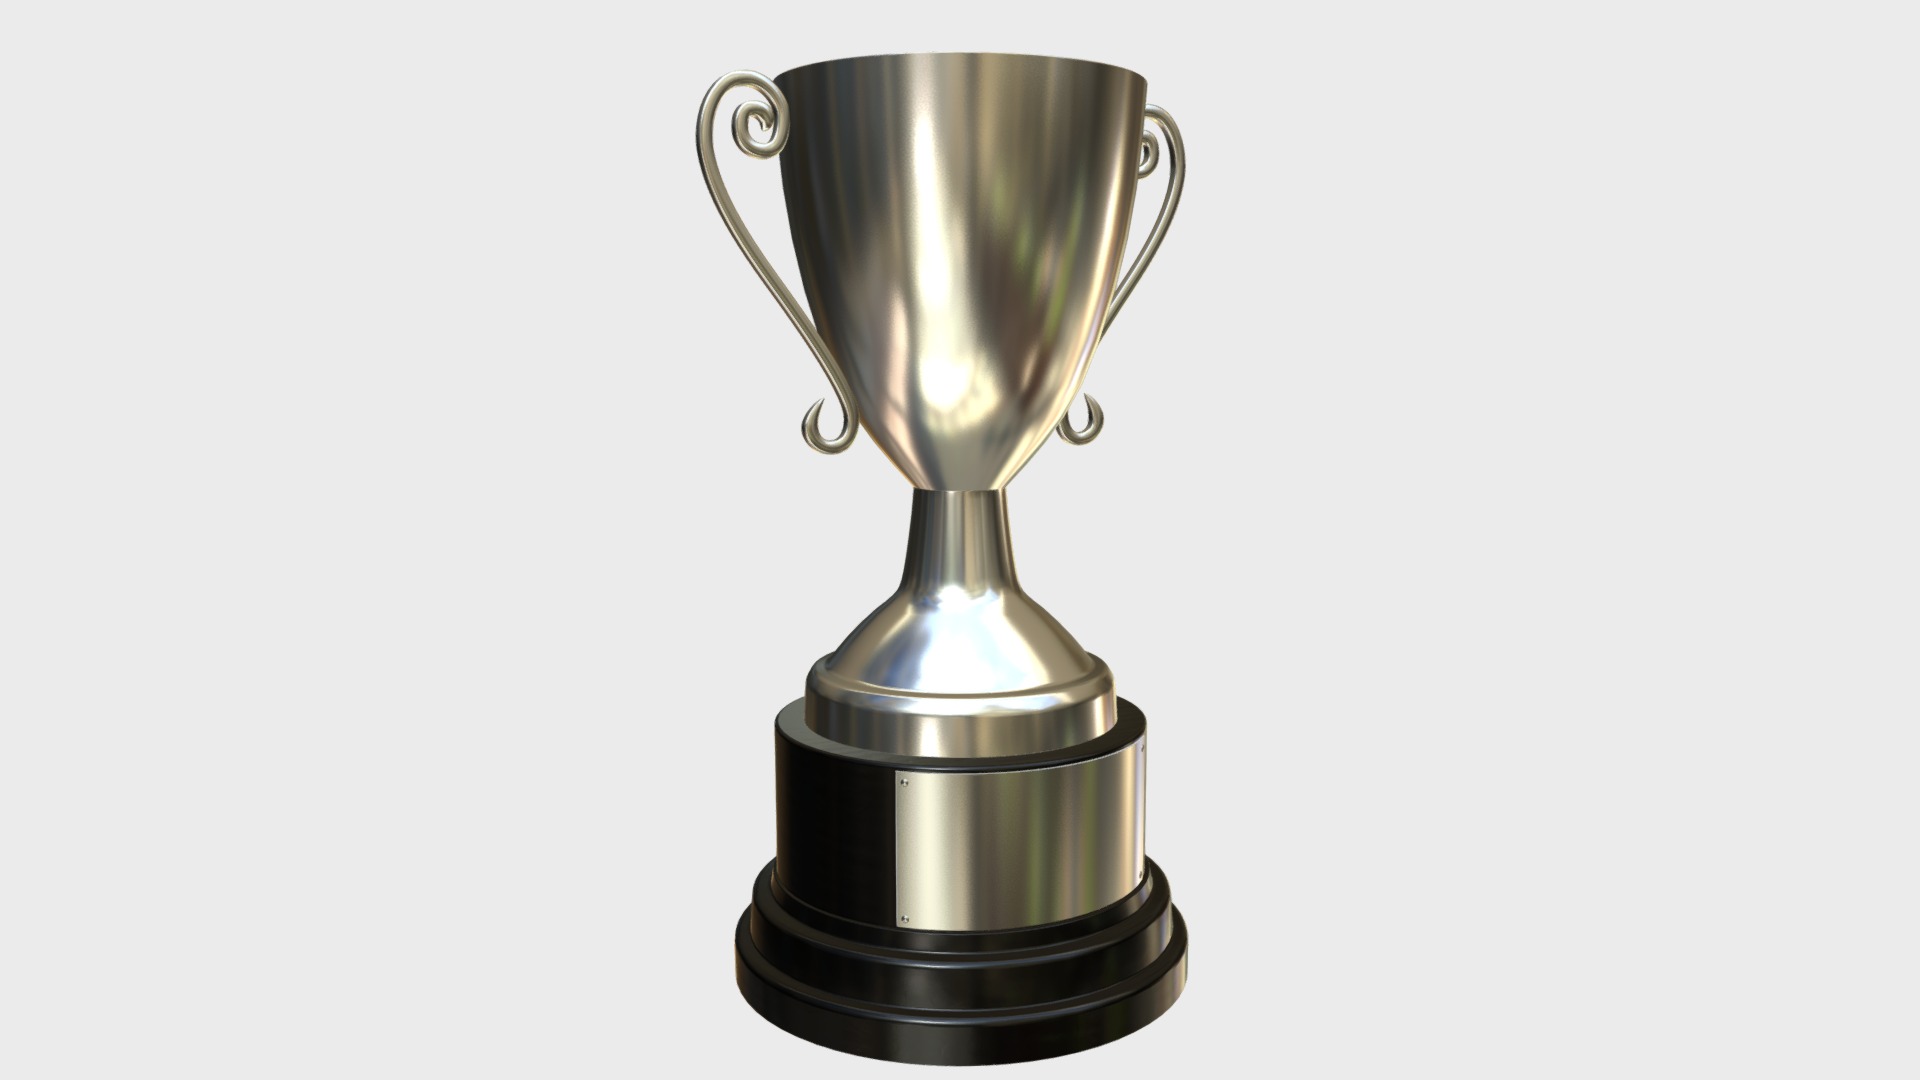 3D model Silver trophy cup - This is a 3D model of the Silver trophy cup. The 3D model is about a silver and gold trophy.